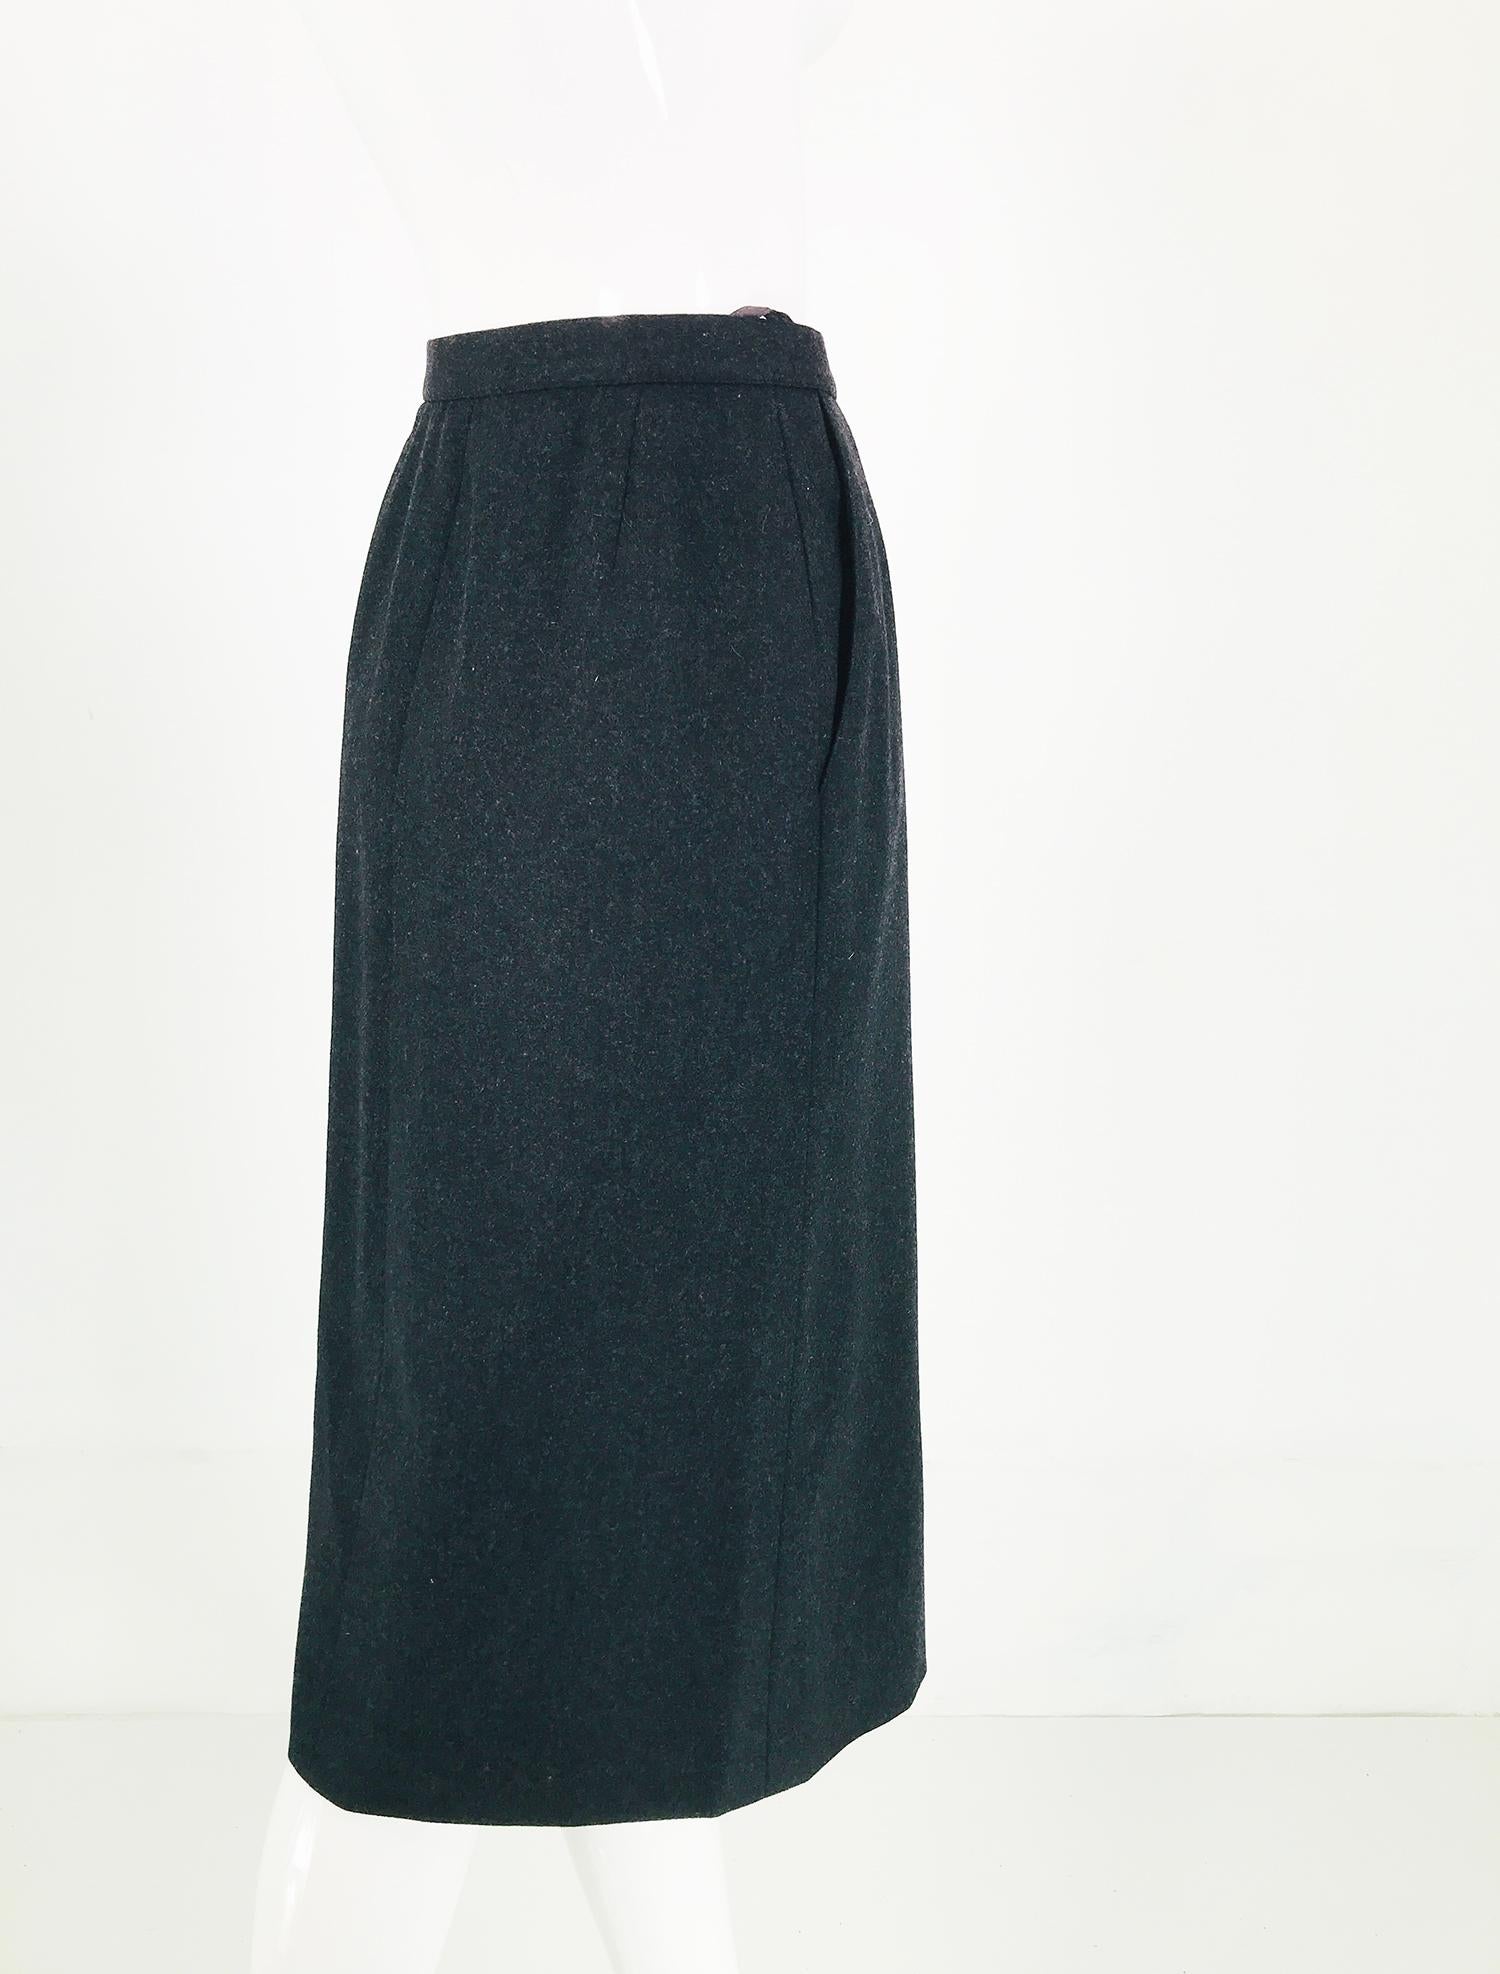 Chanel Charcoal Wool Kick Pleat Front Pocket Pencil Skirt Vintage In Good Condition For Sale In West Palm Beach, FL